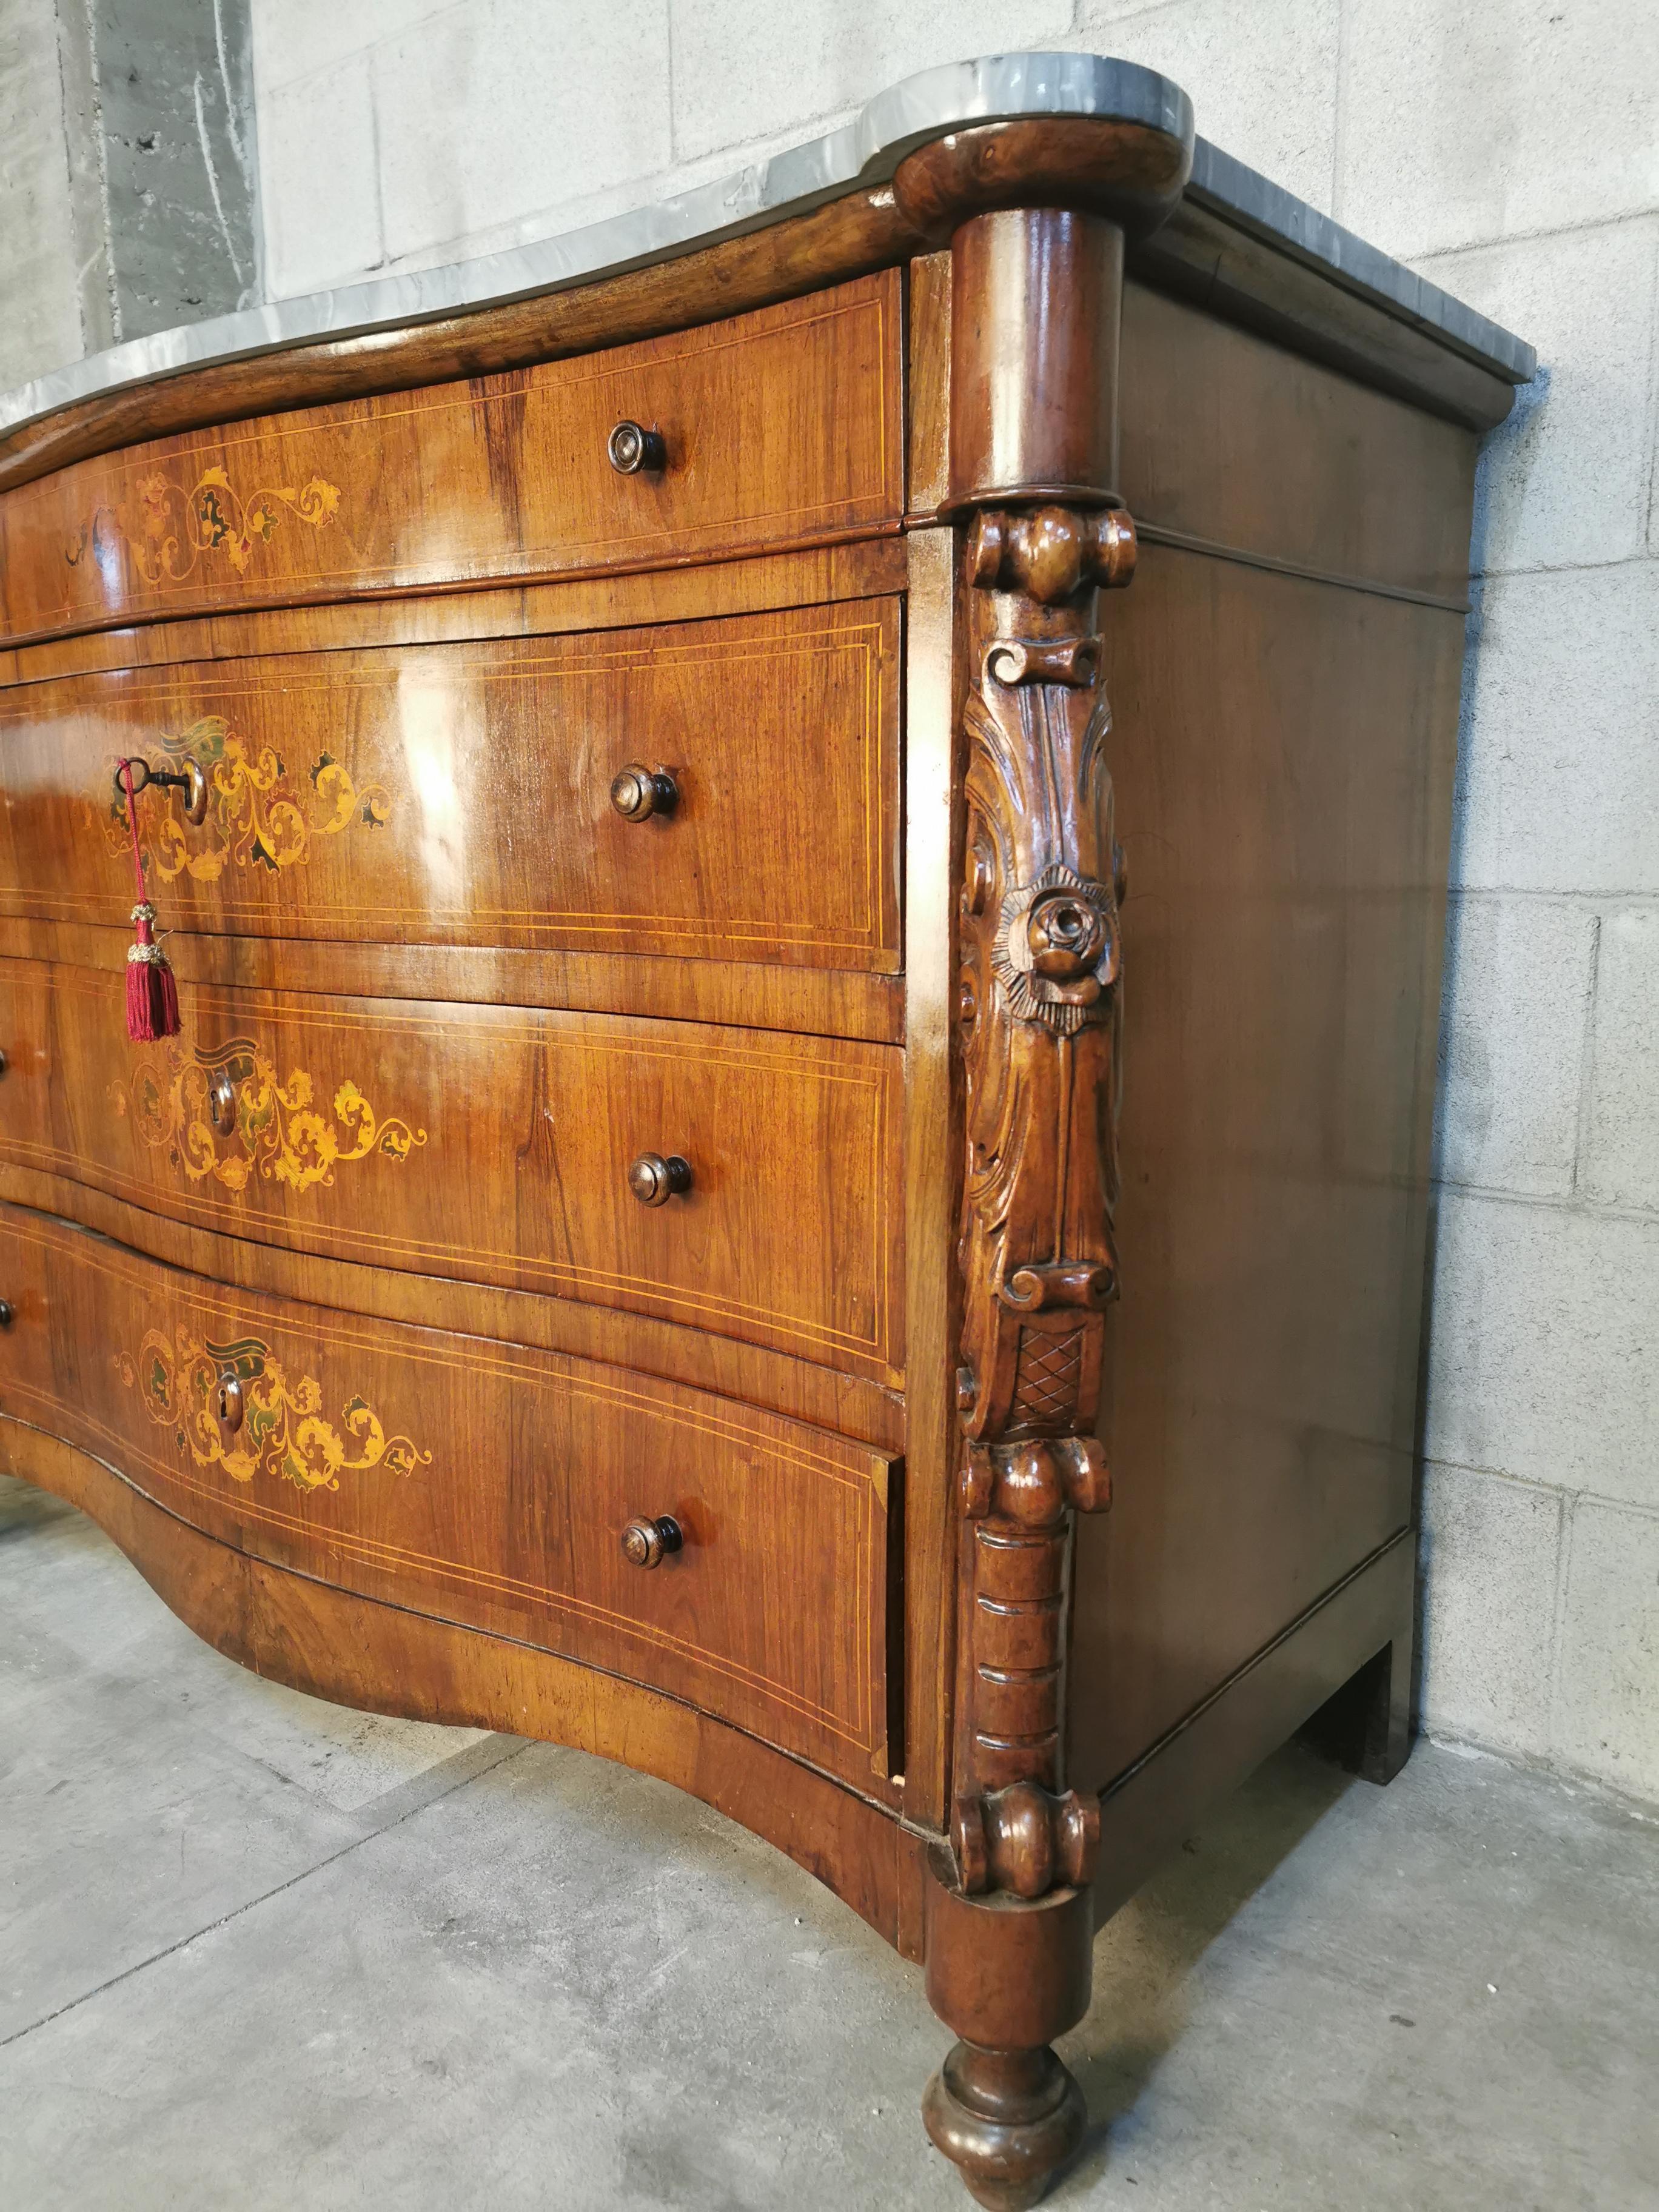 Inlay 19th Century Marquetry Chest of Drawers with an Italian Carrara Marble